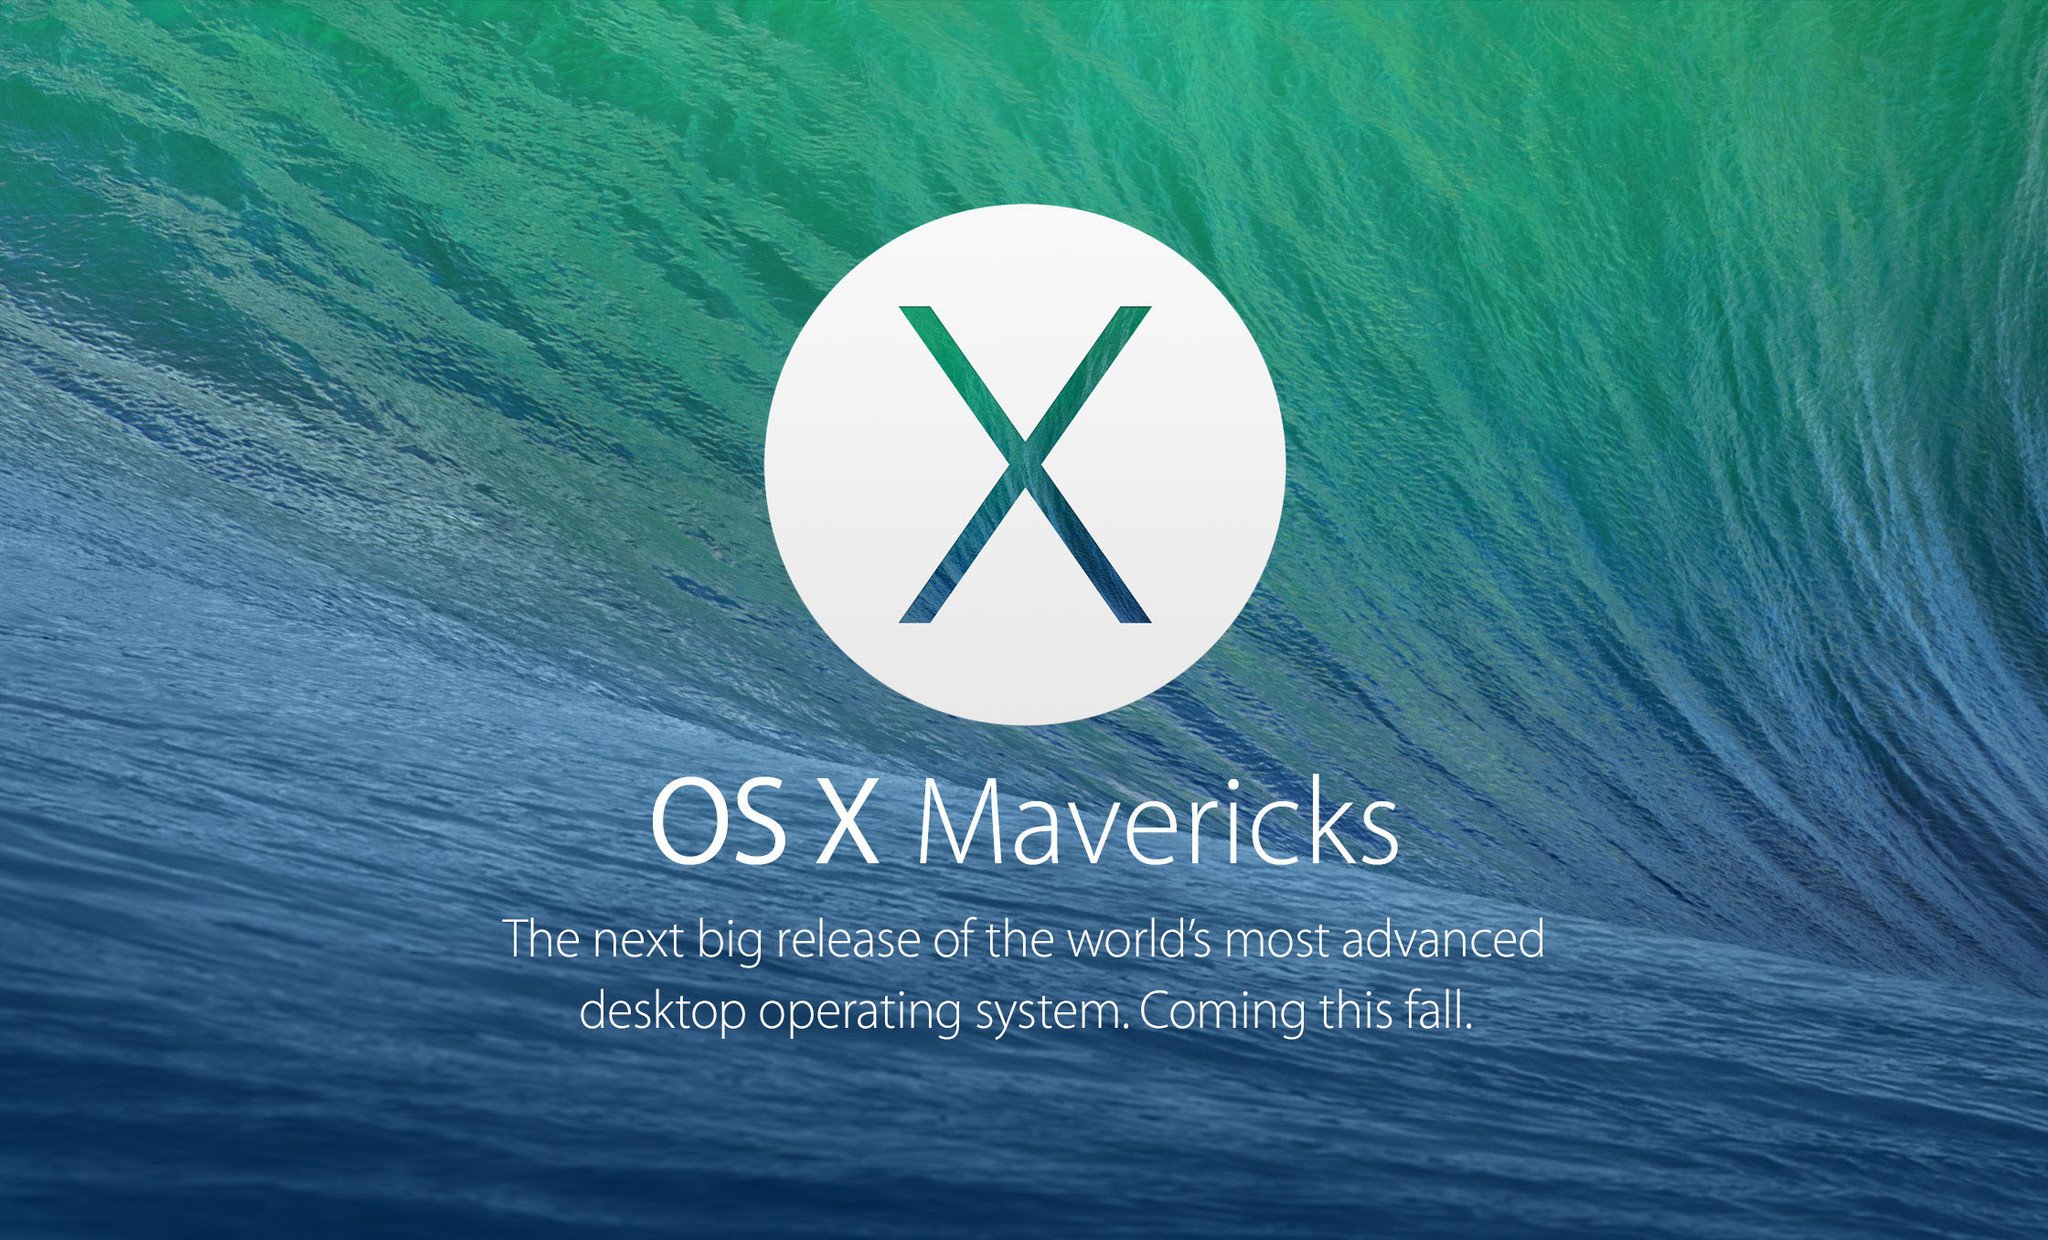 Mavericks gold master (GM) seed now available - Developers, go get it!